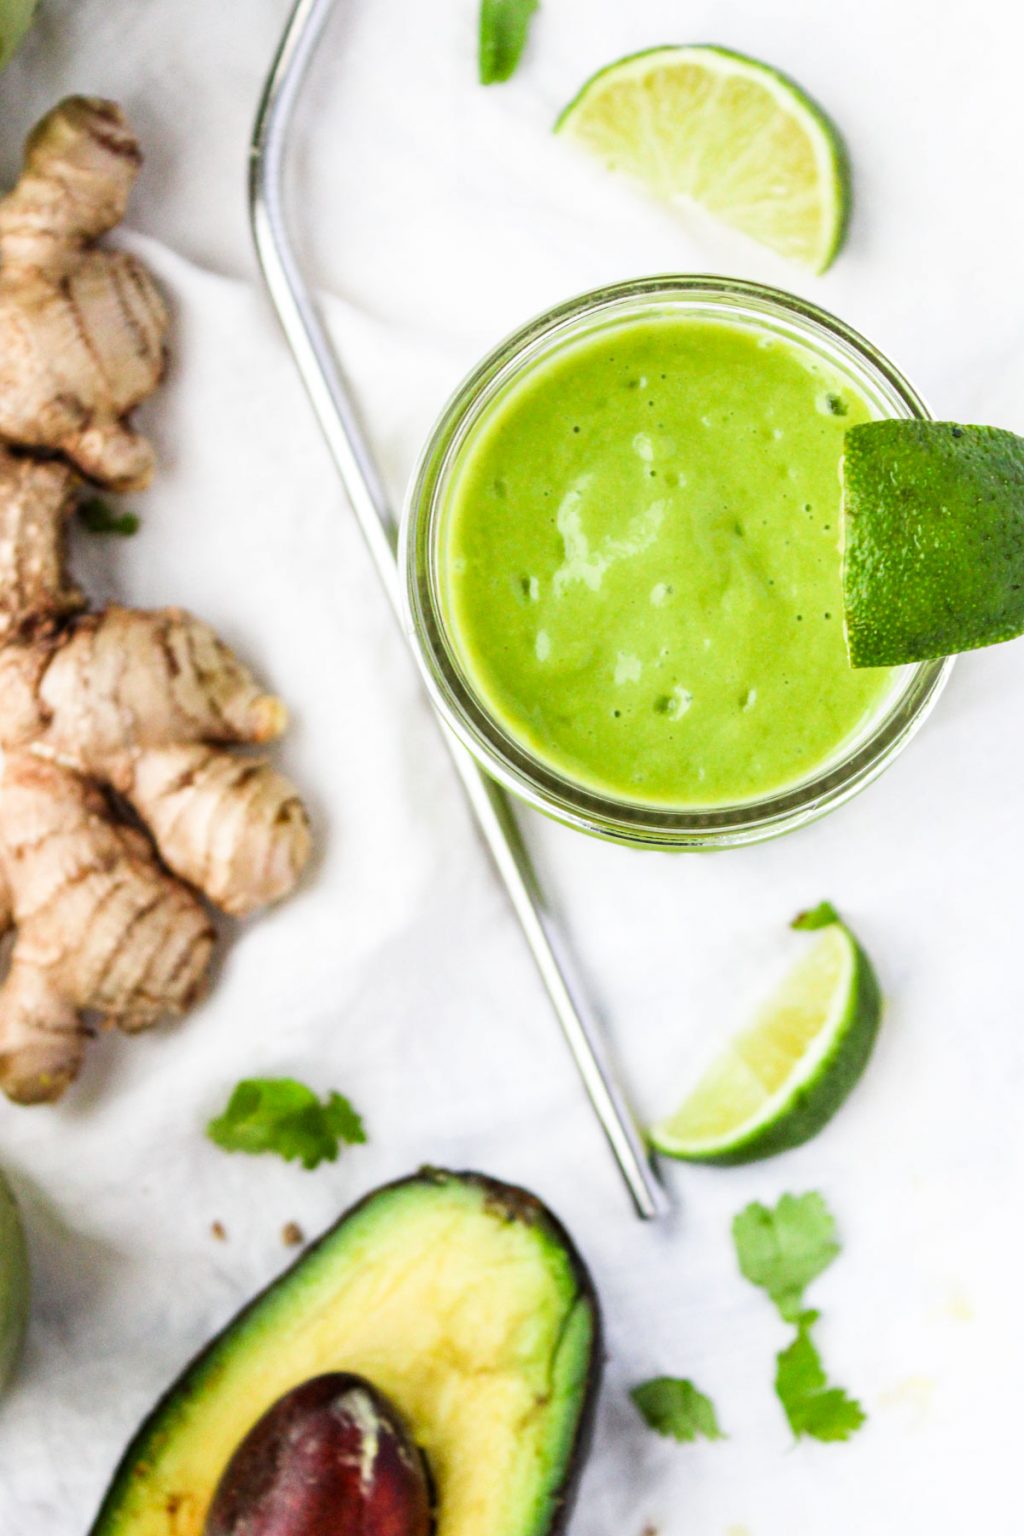 Tropical Green Smoothie with ginger root and avocado beside it